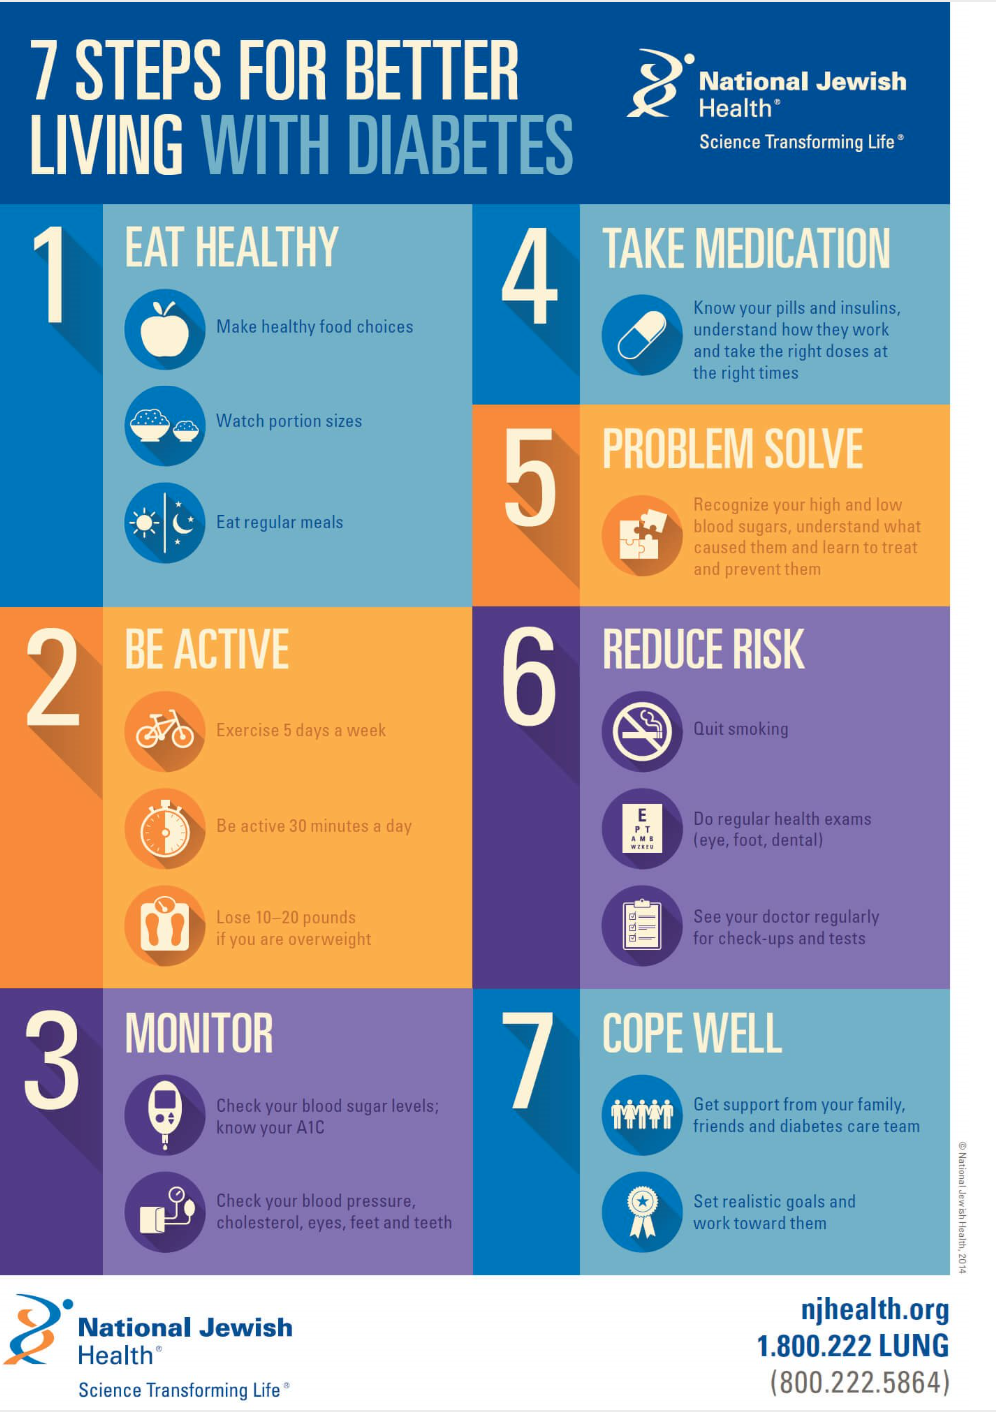 Steps for effective self-care in diabetes